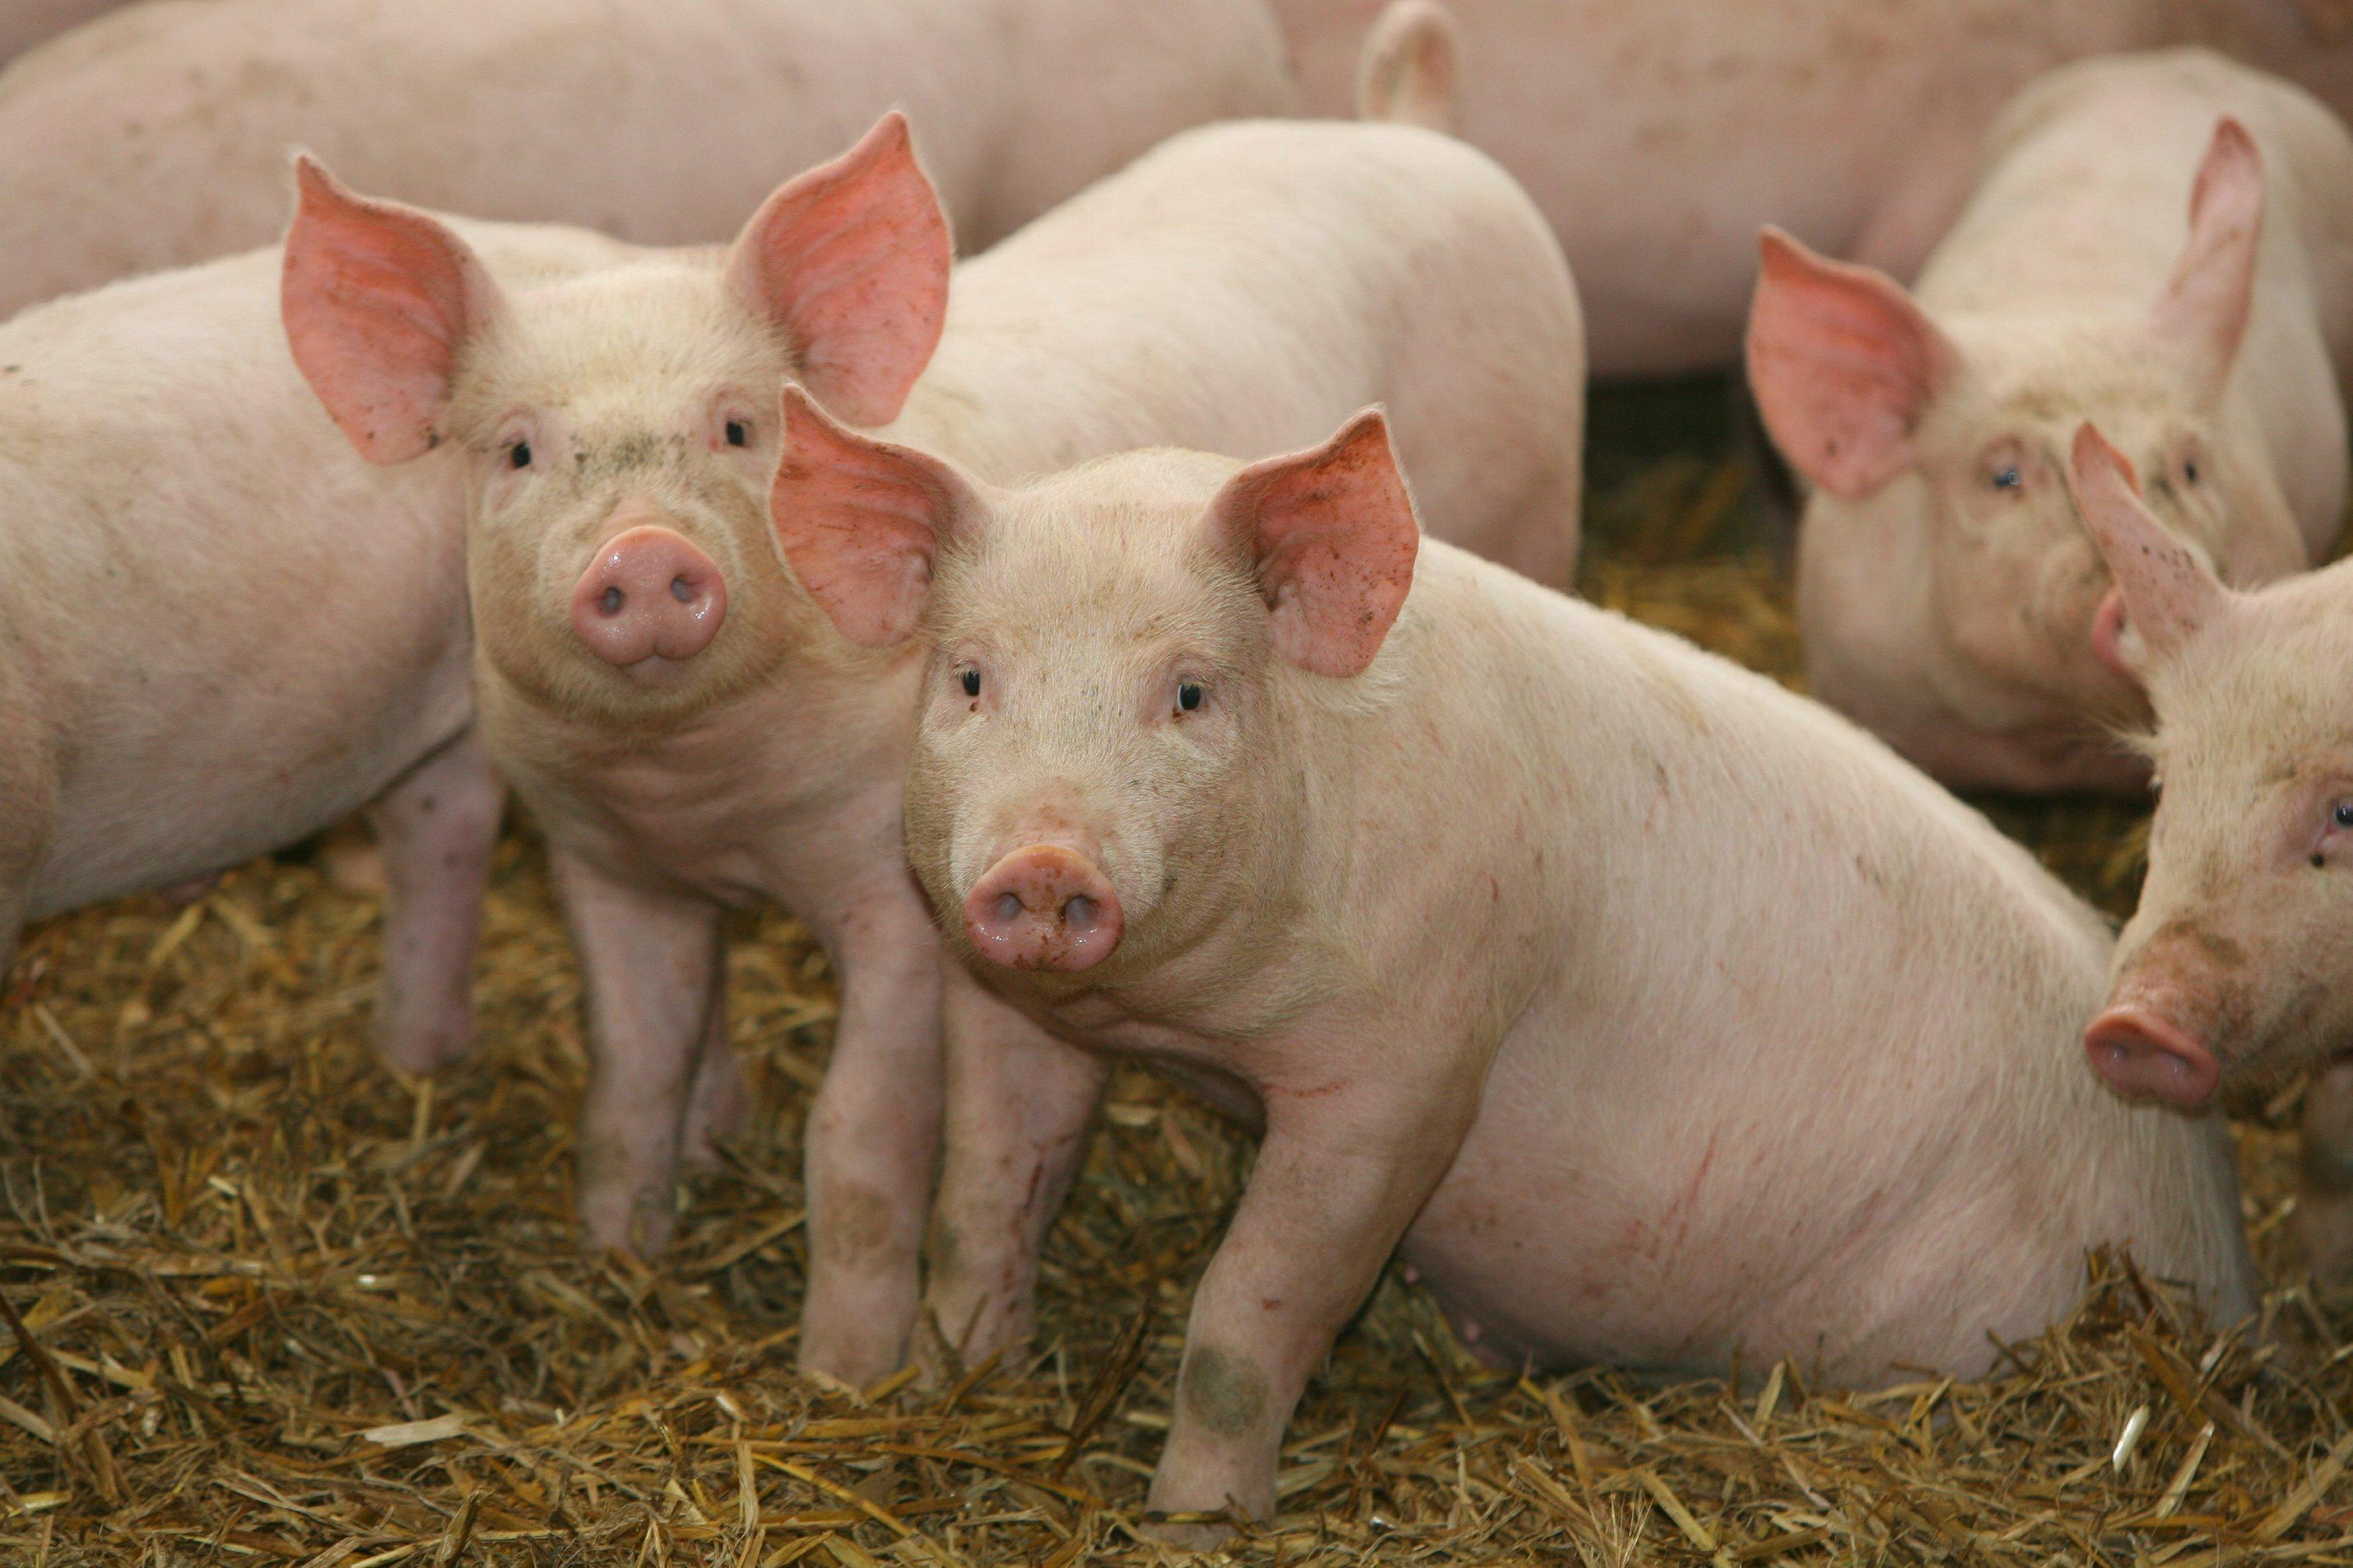 Two pigs, in a barn, gaze directly at the camera.